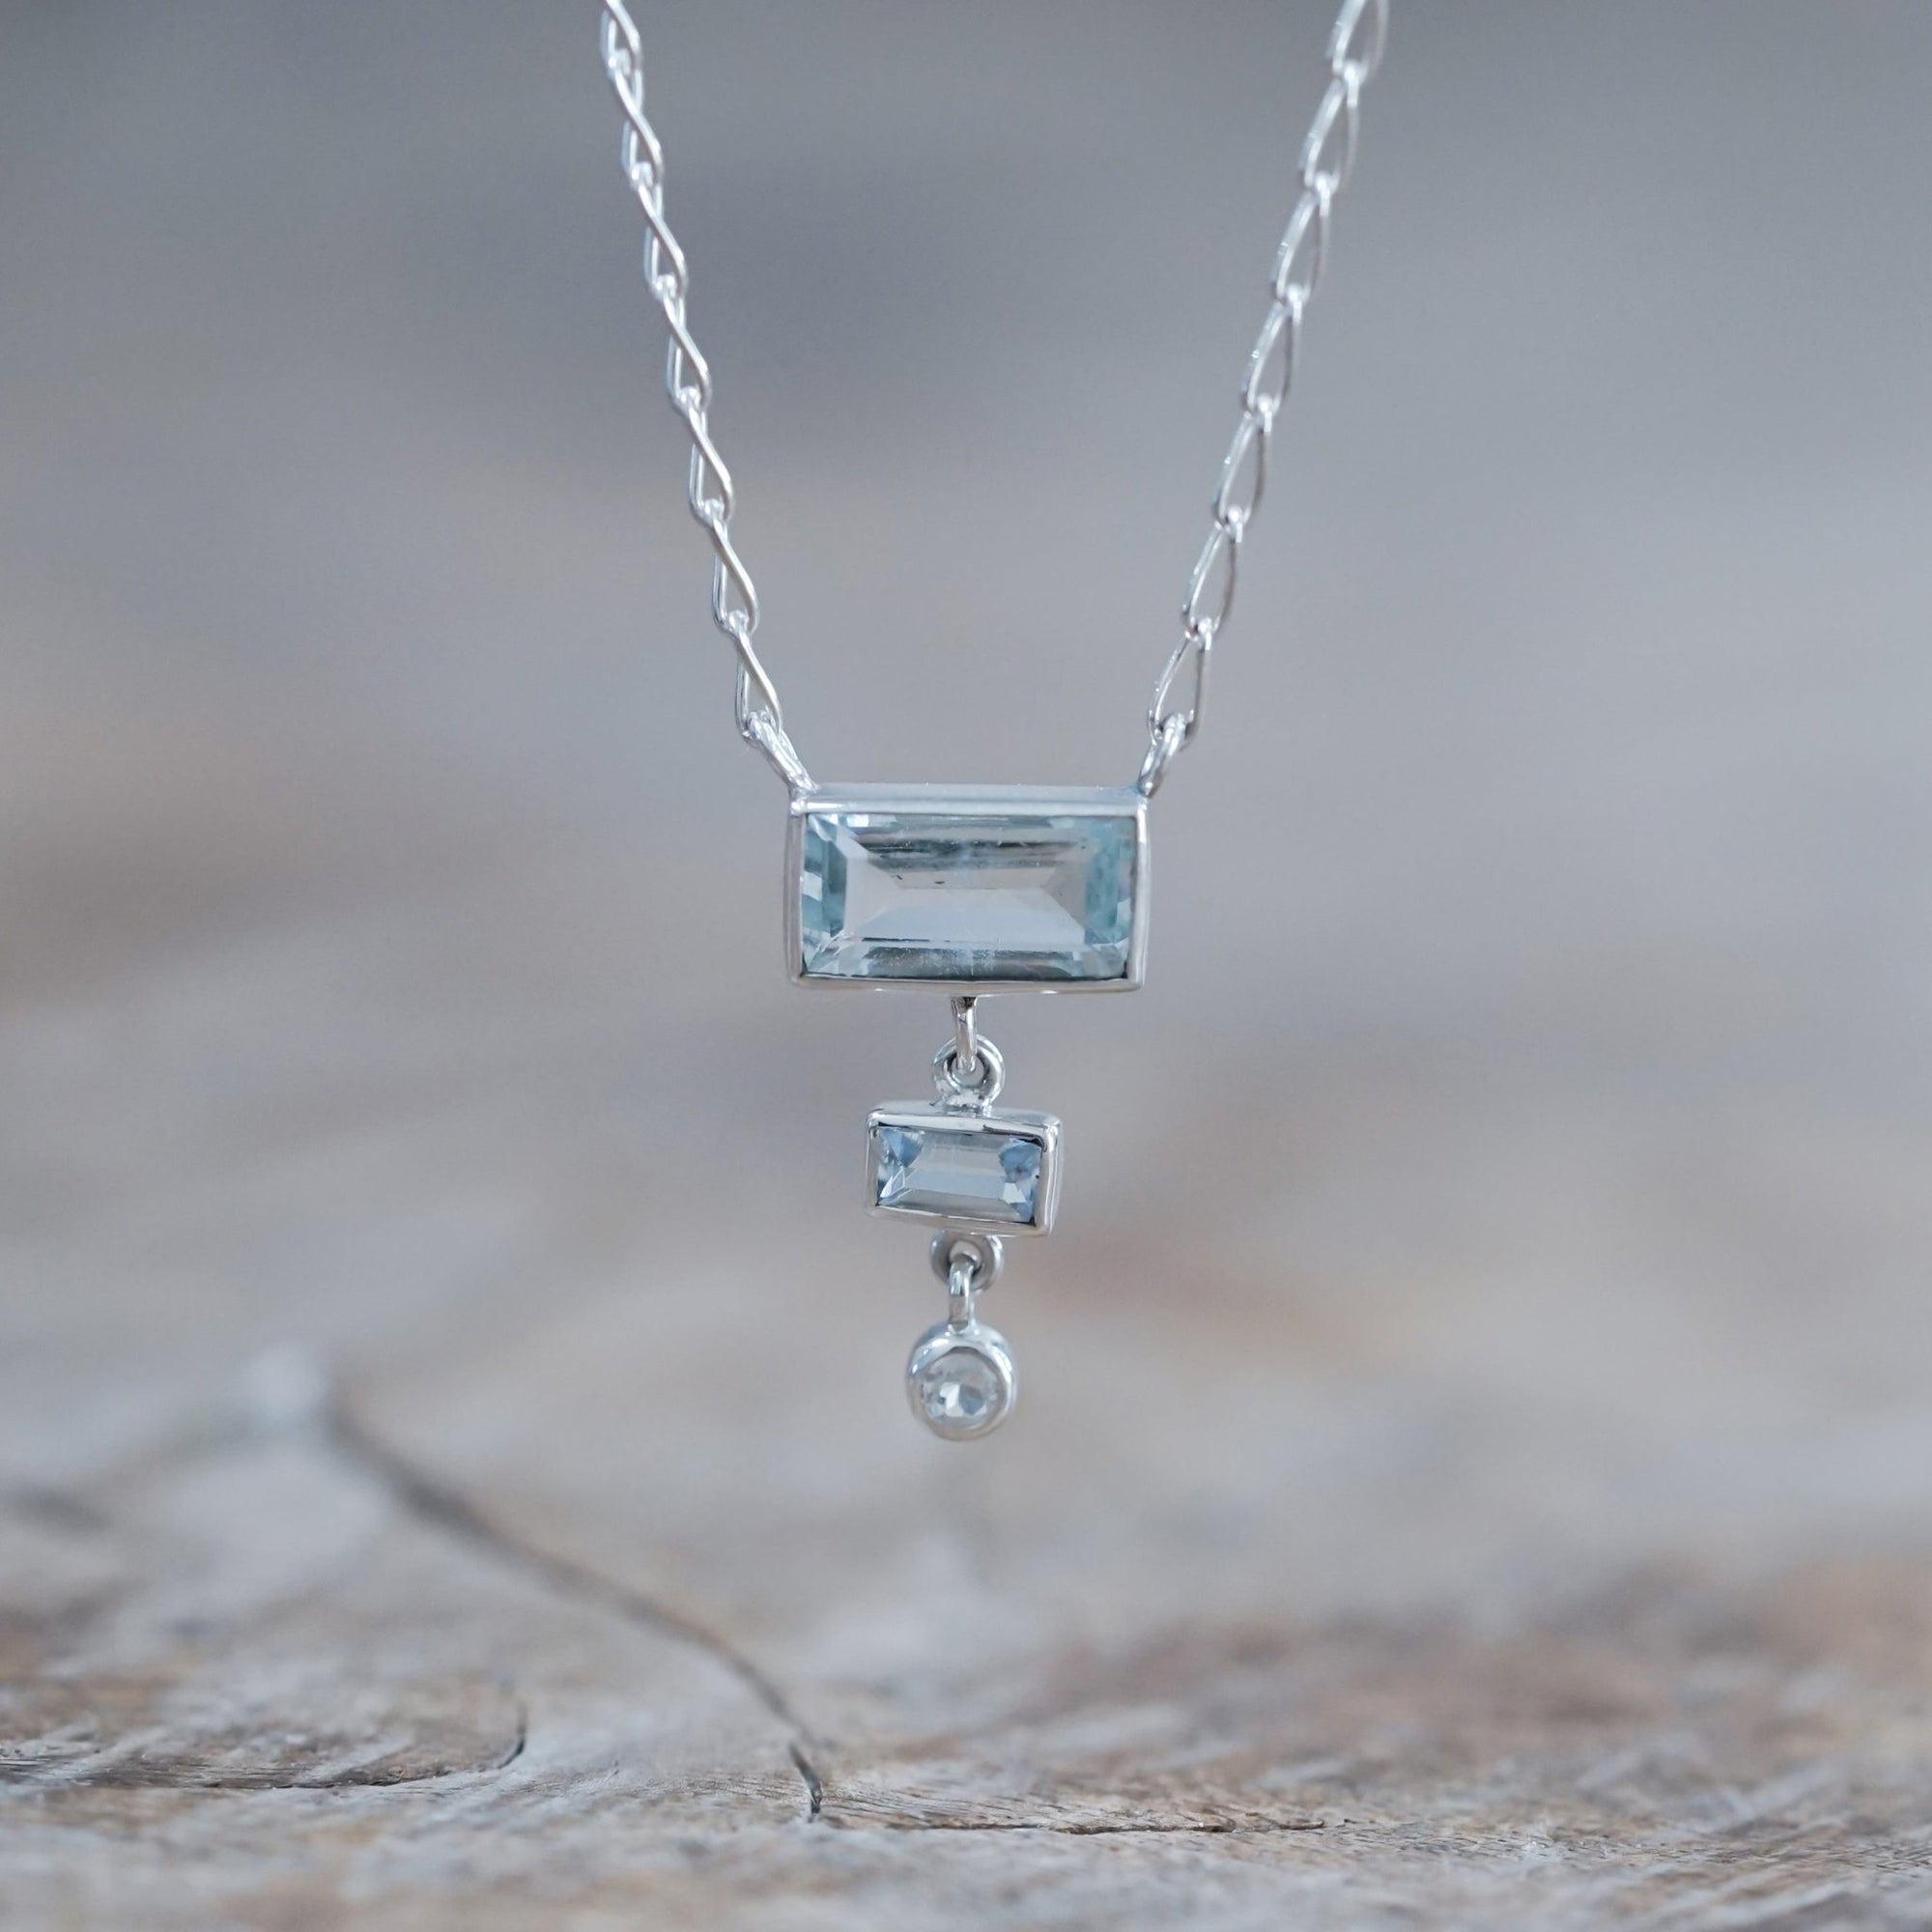 Aquamarine and Moonstone Necklace - Gardens of the Sun | Ethical Jewelry